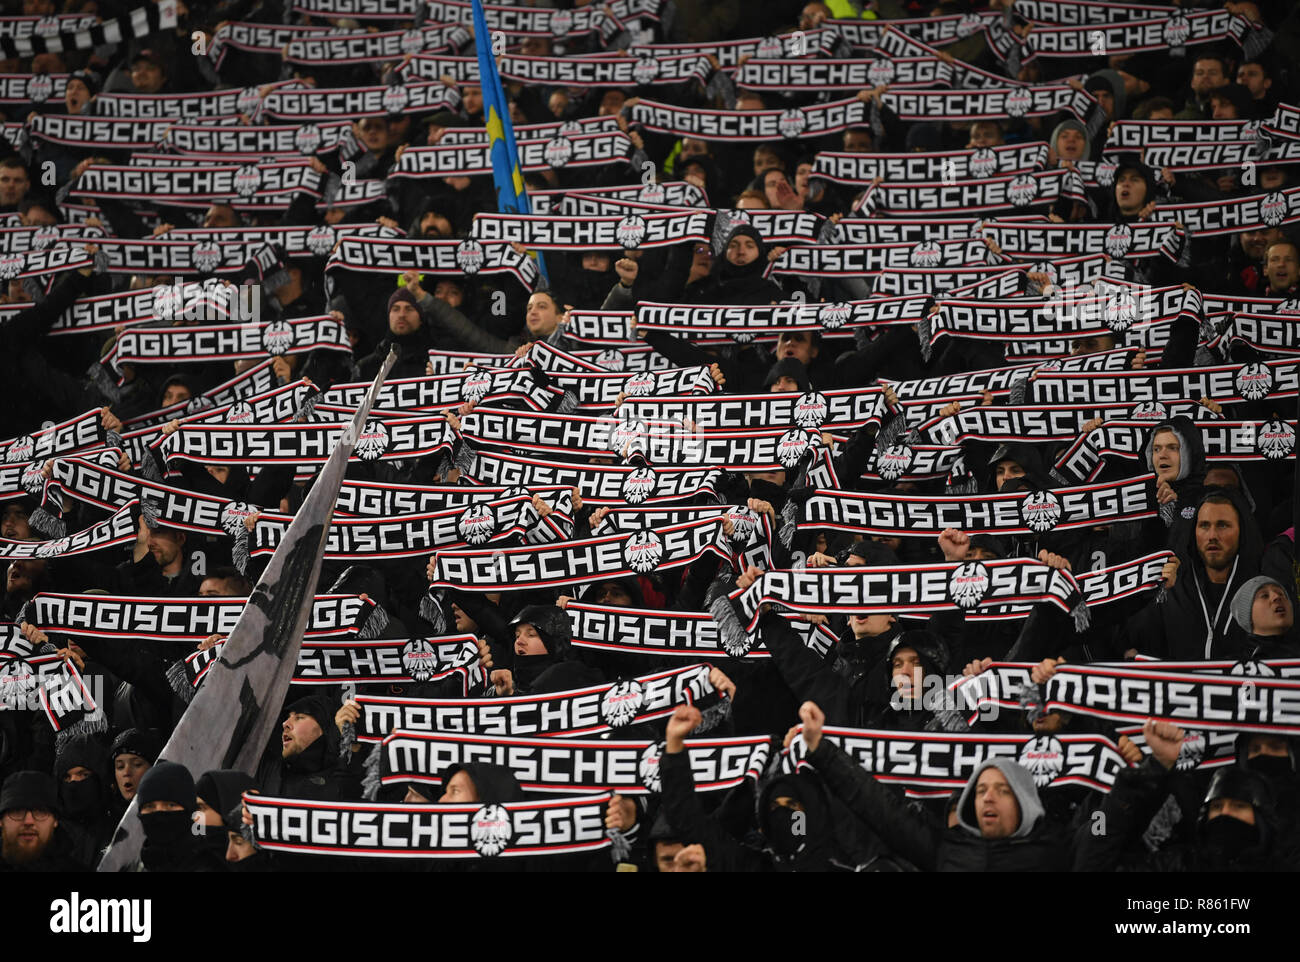 Rome, Italy. 13th Dec, 2018. Soccer: Europa League, Lazio Rome - Eintracht  Frankfurt, Group stage, Group H, 6th matchday in the Olympic Stadium. The  Frankfurt fans hold up scarves with the inscription "